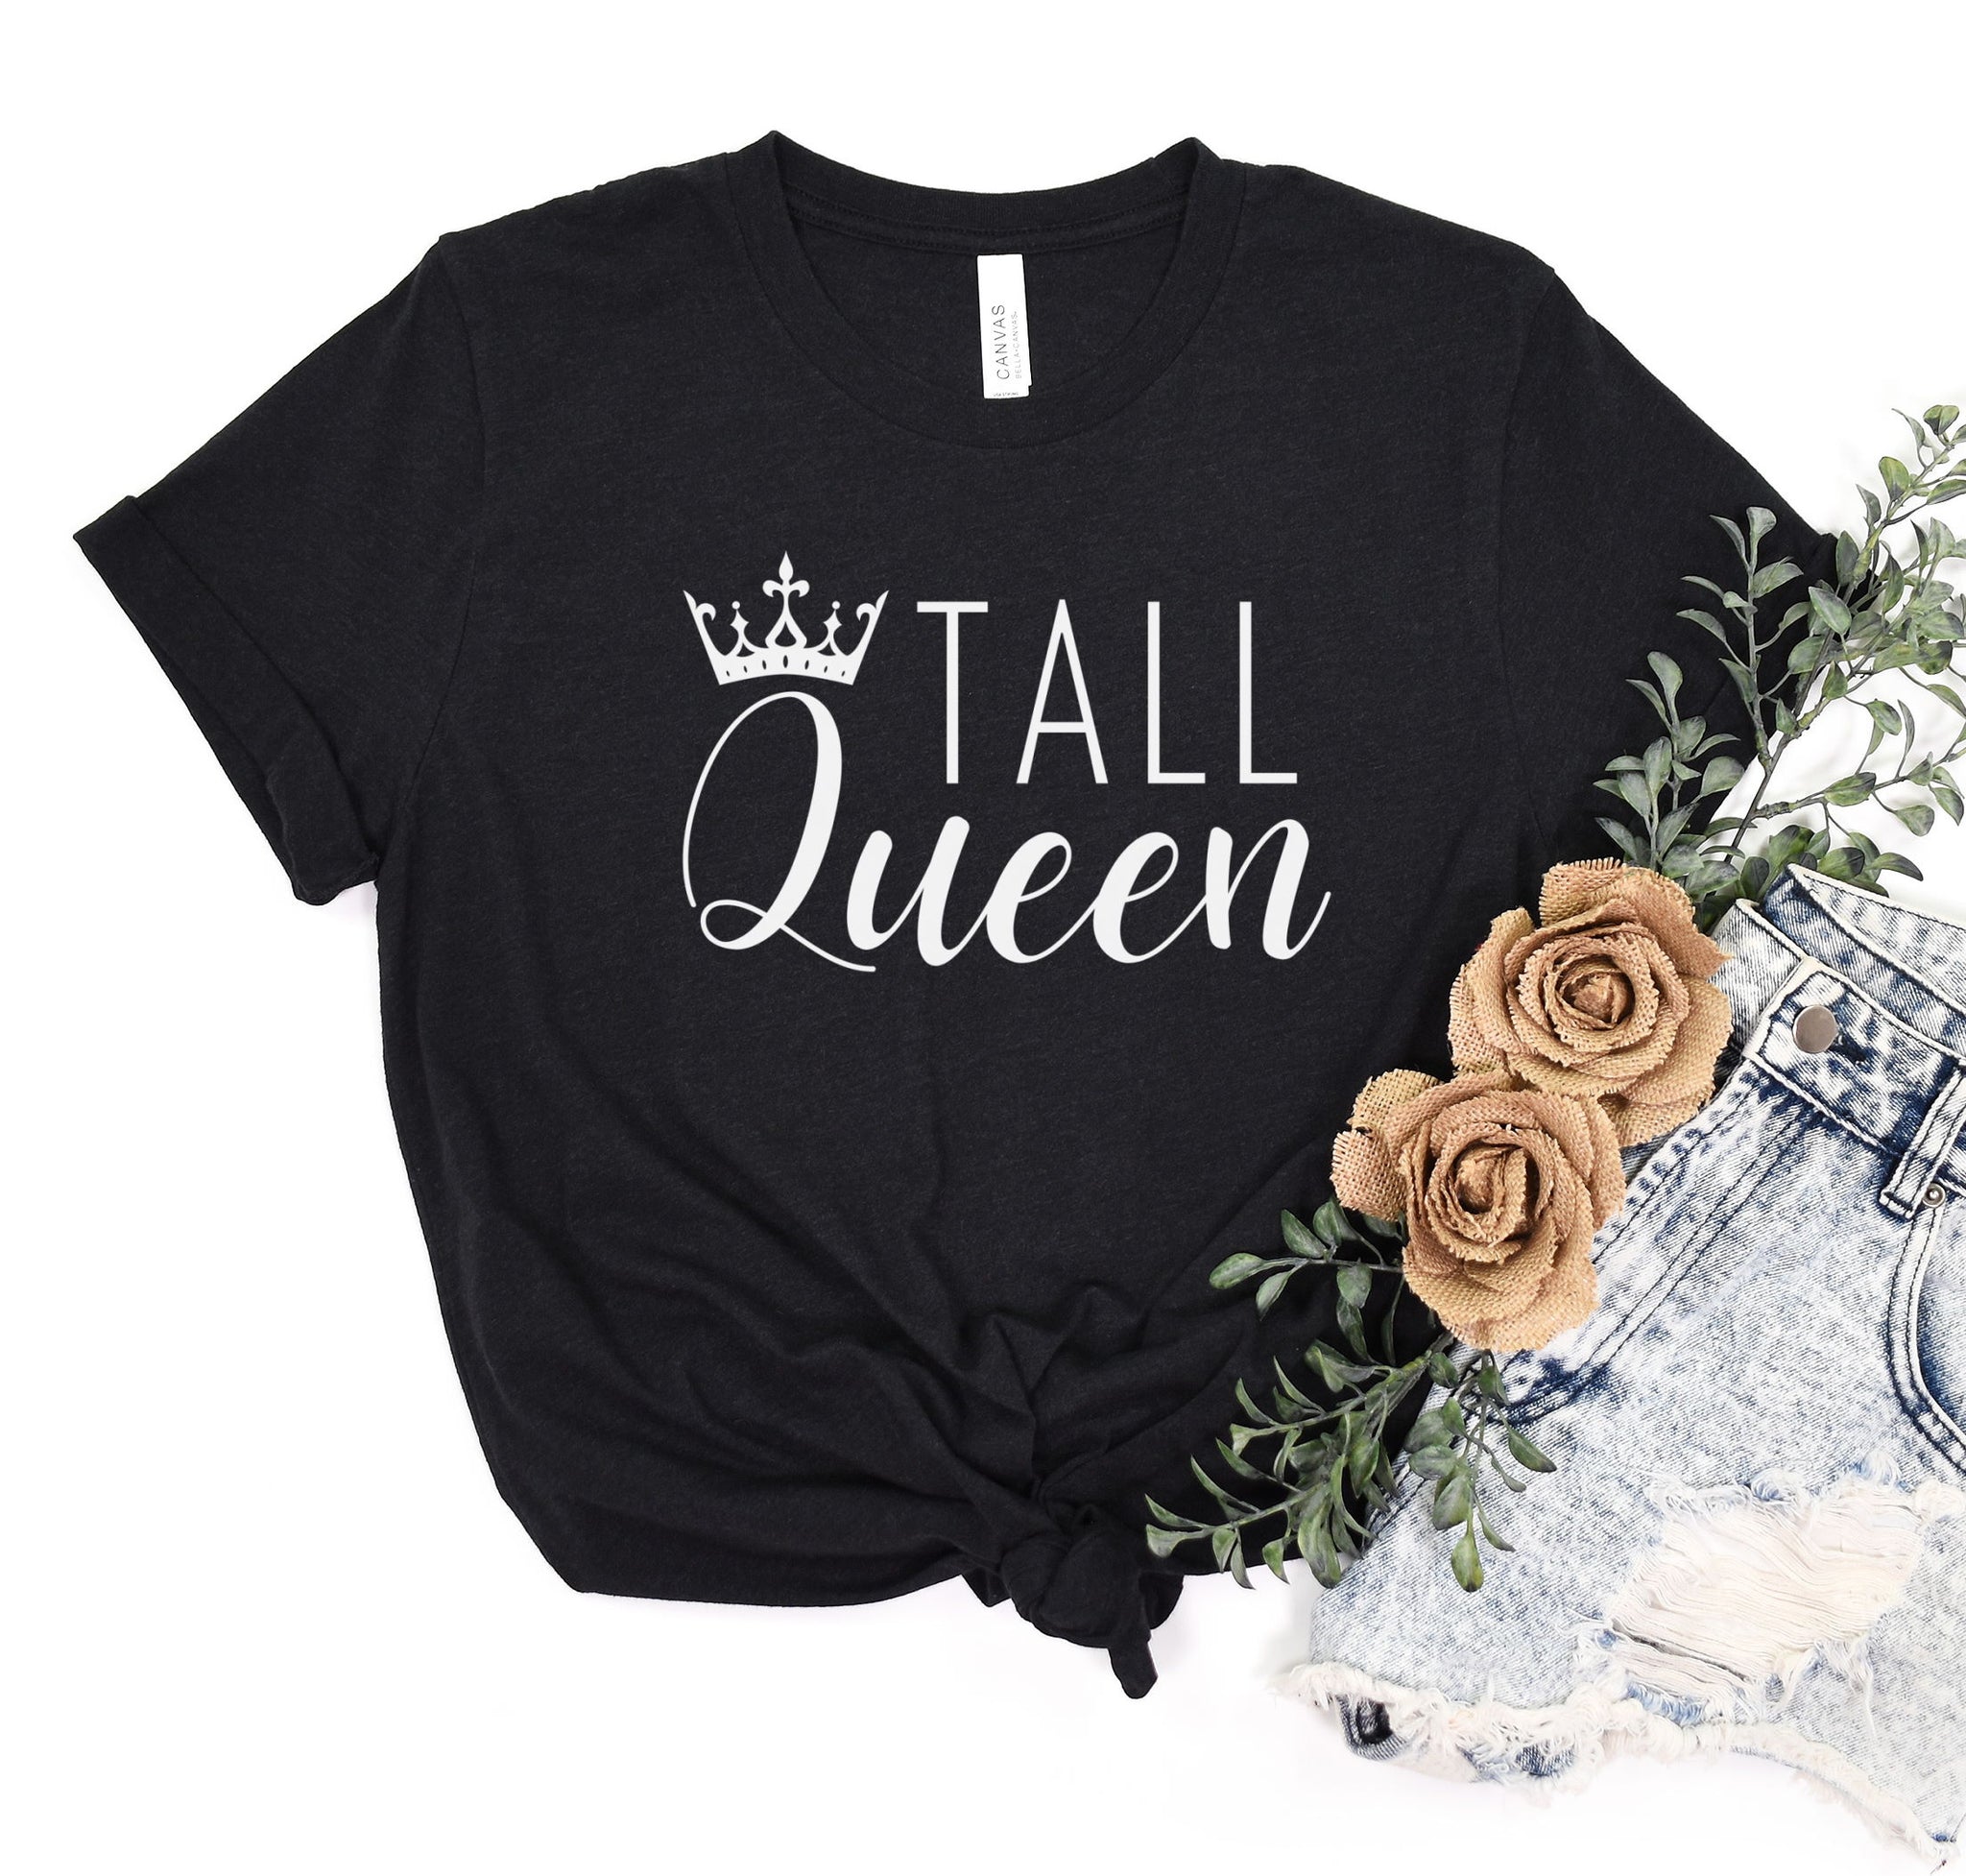 Unique graphic tee shirt for tall women.